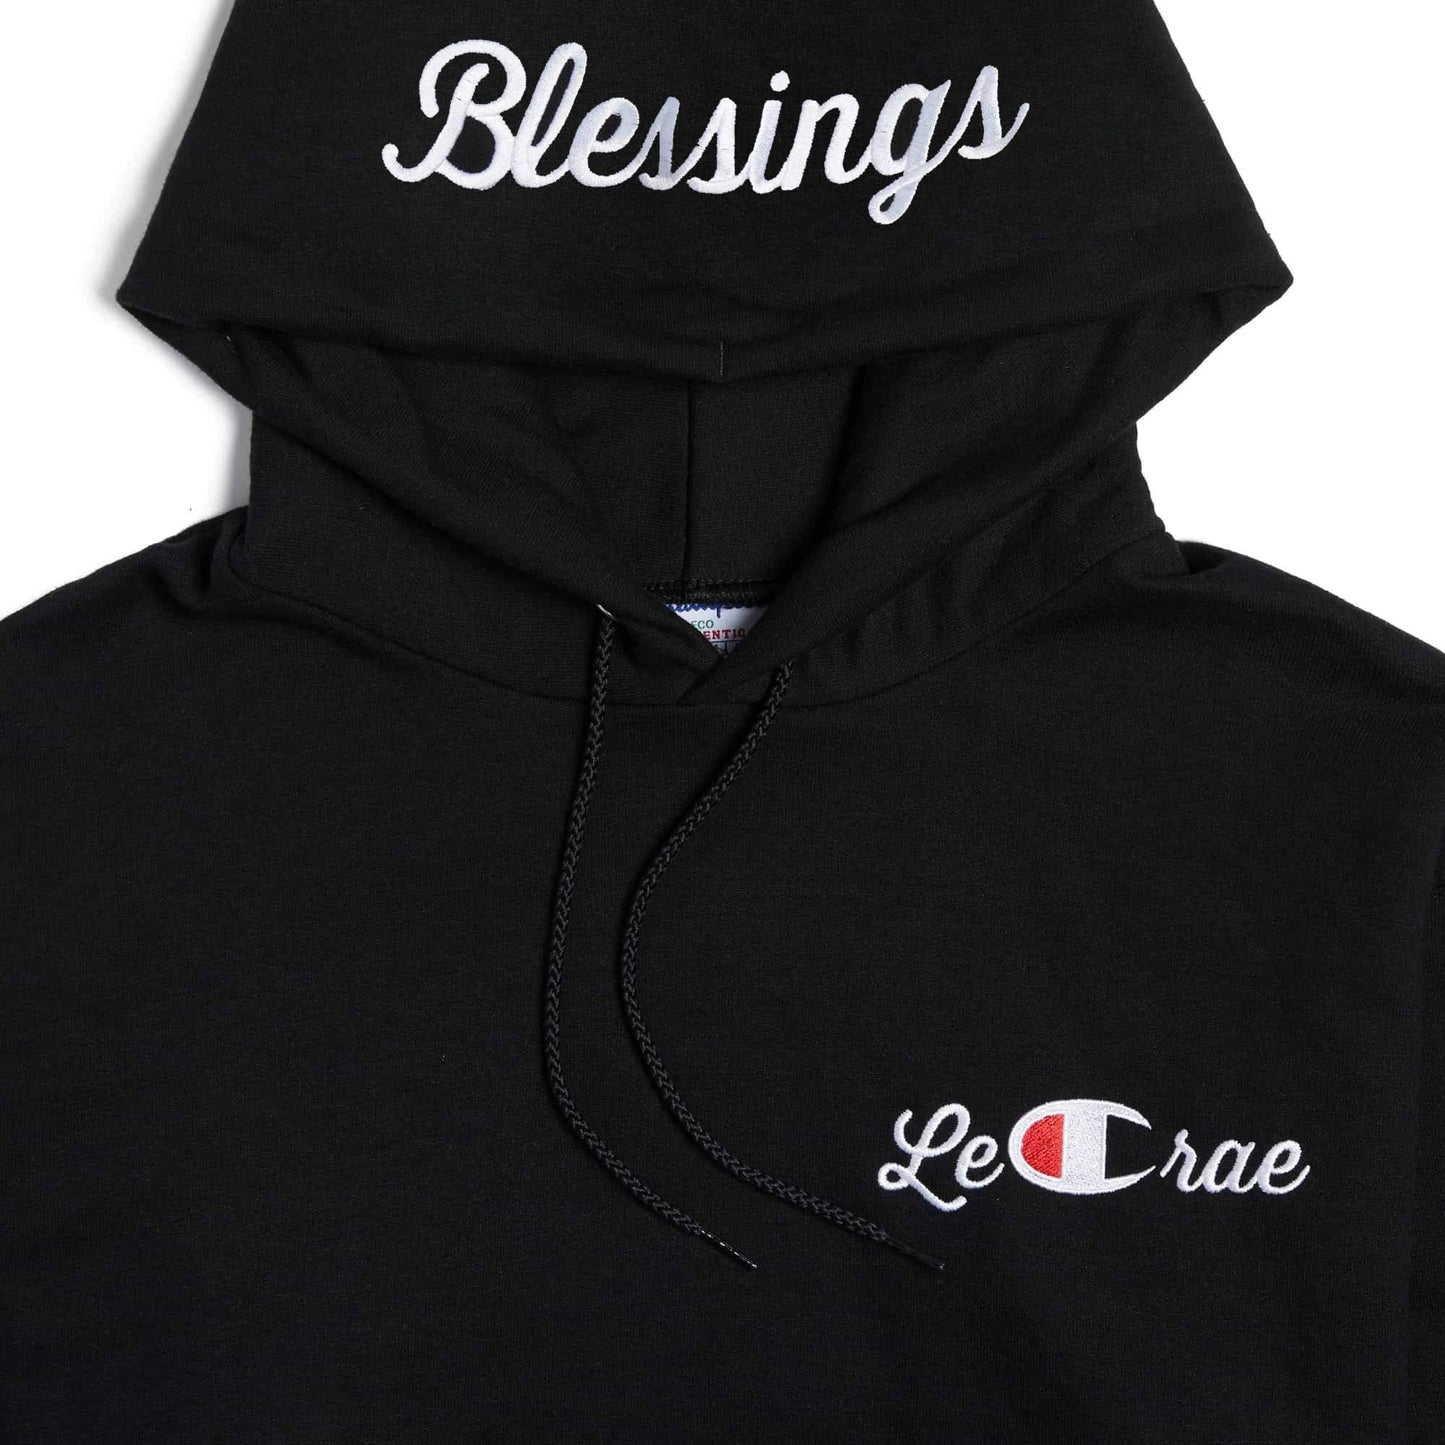 Blessings champion black hoodie front up close Lecrae